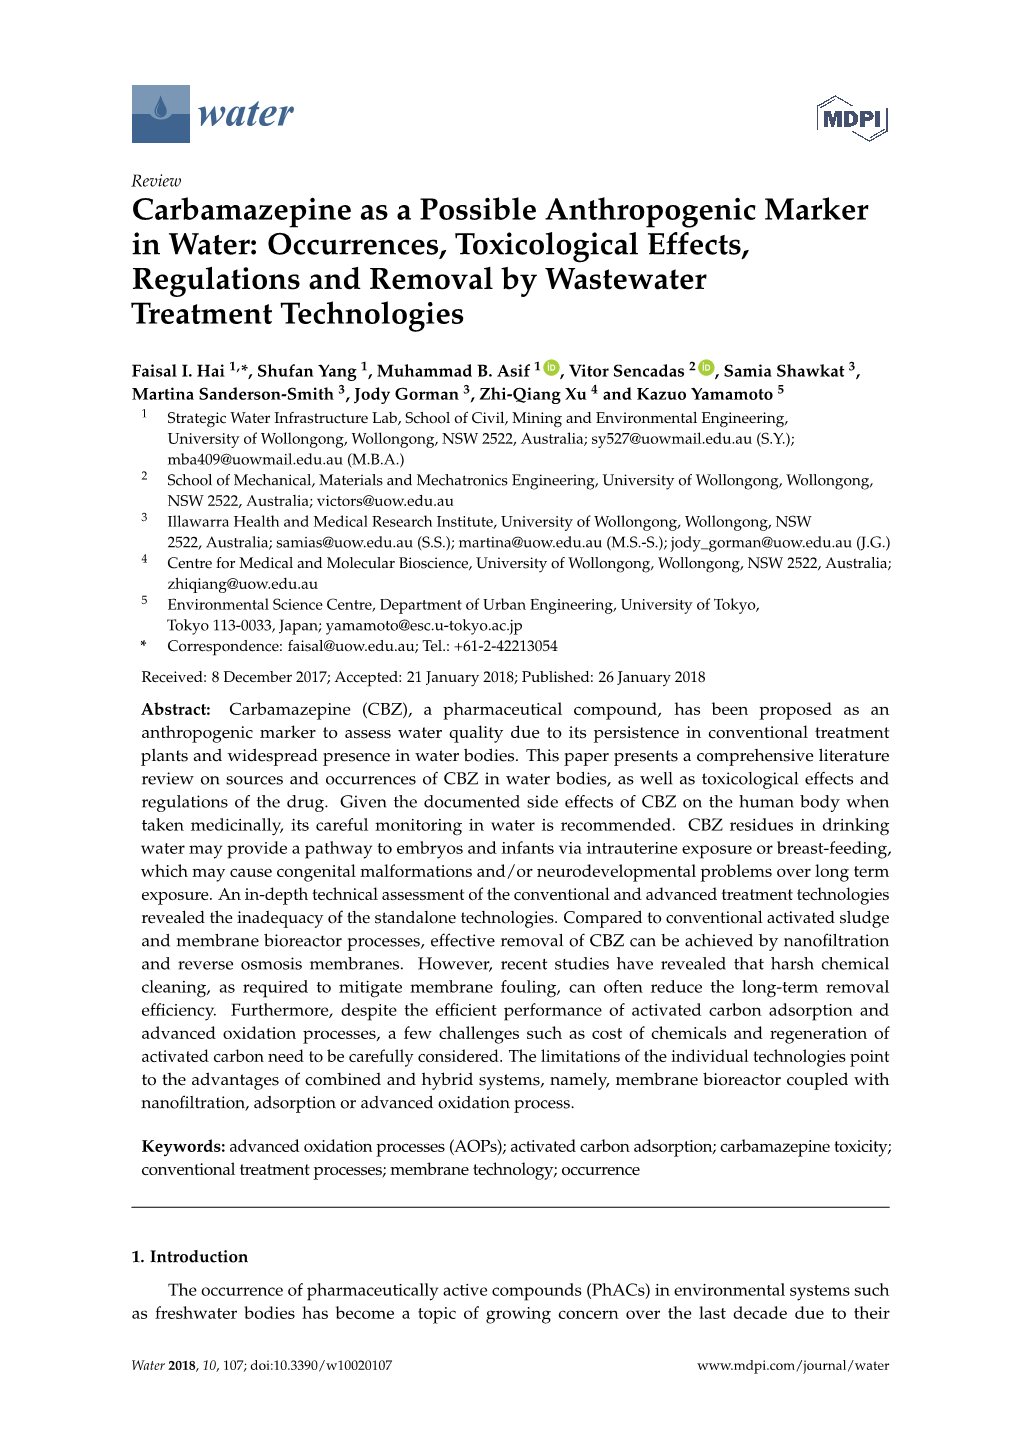 Carbamazepine As a Possible Anthropogenic Marker in Water: Occurrences, Toxicological Effects, Regulations and Removal by Wastewater Treatment Technologies